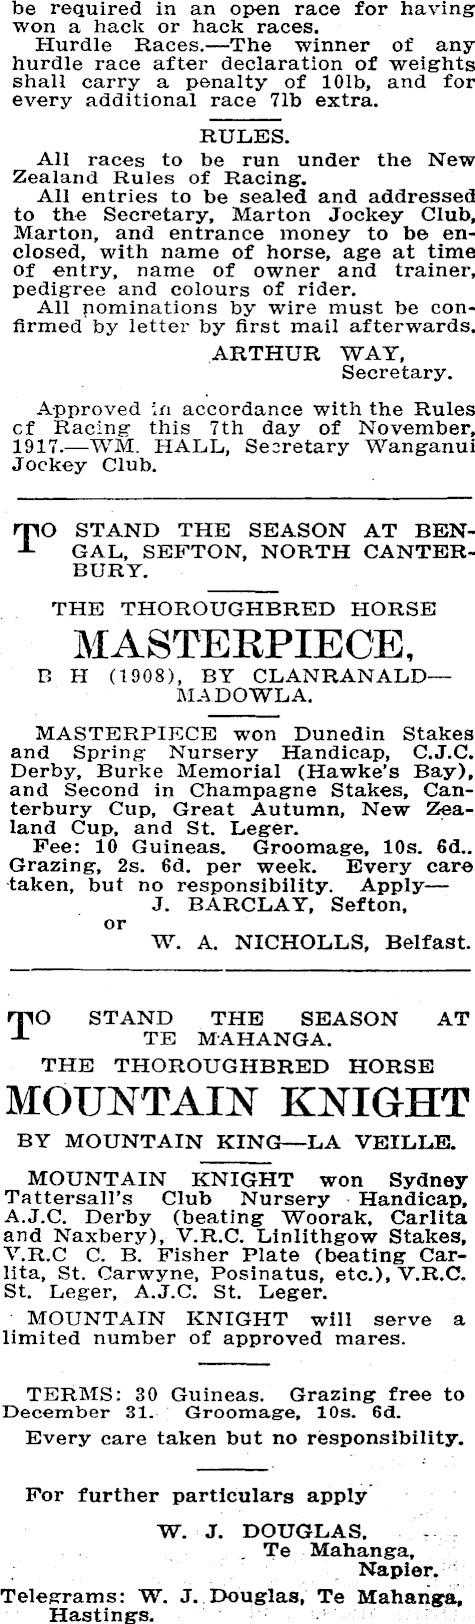 Papers Past | Magazines and Journals | New Zealand Illustrated Sporting &  Dramatic Review | 15 November 1917 | Page 23 Advertisements Column 2